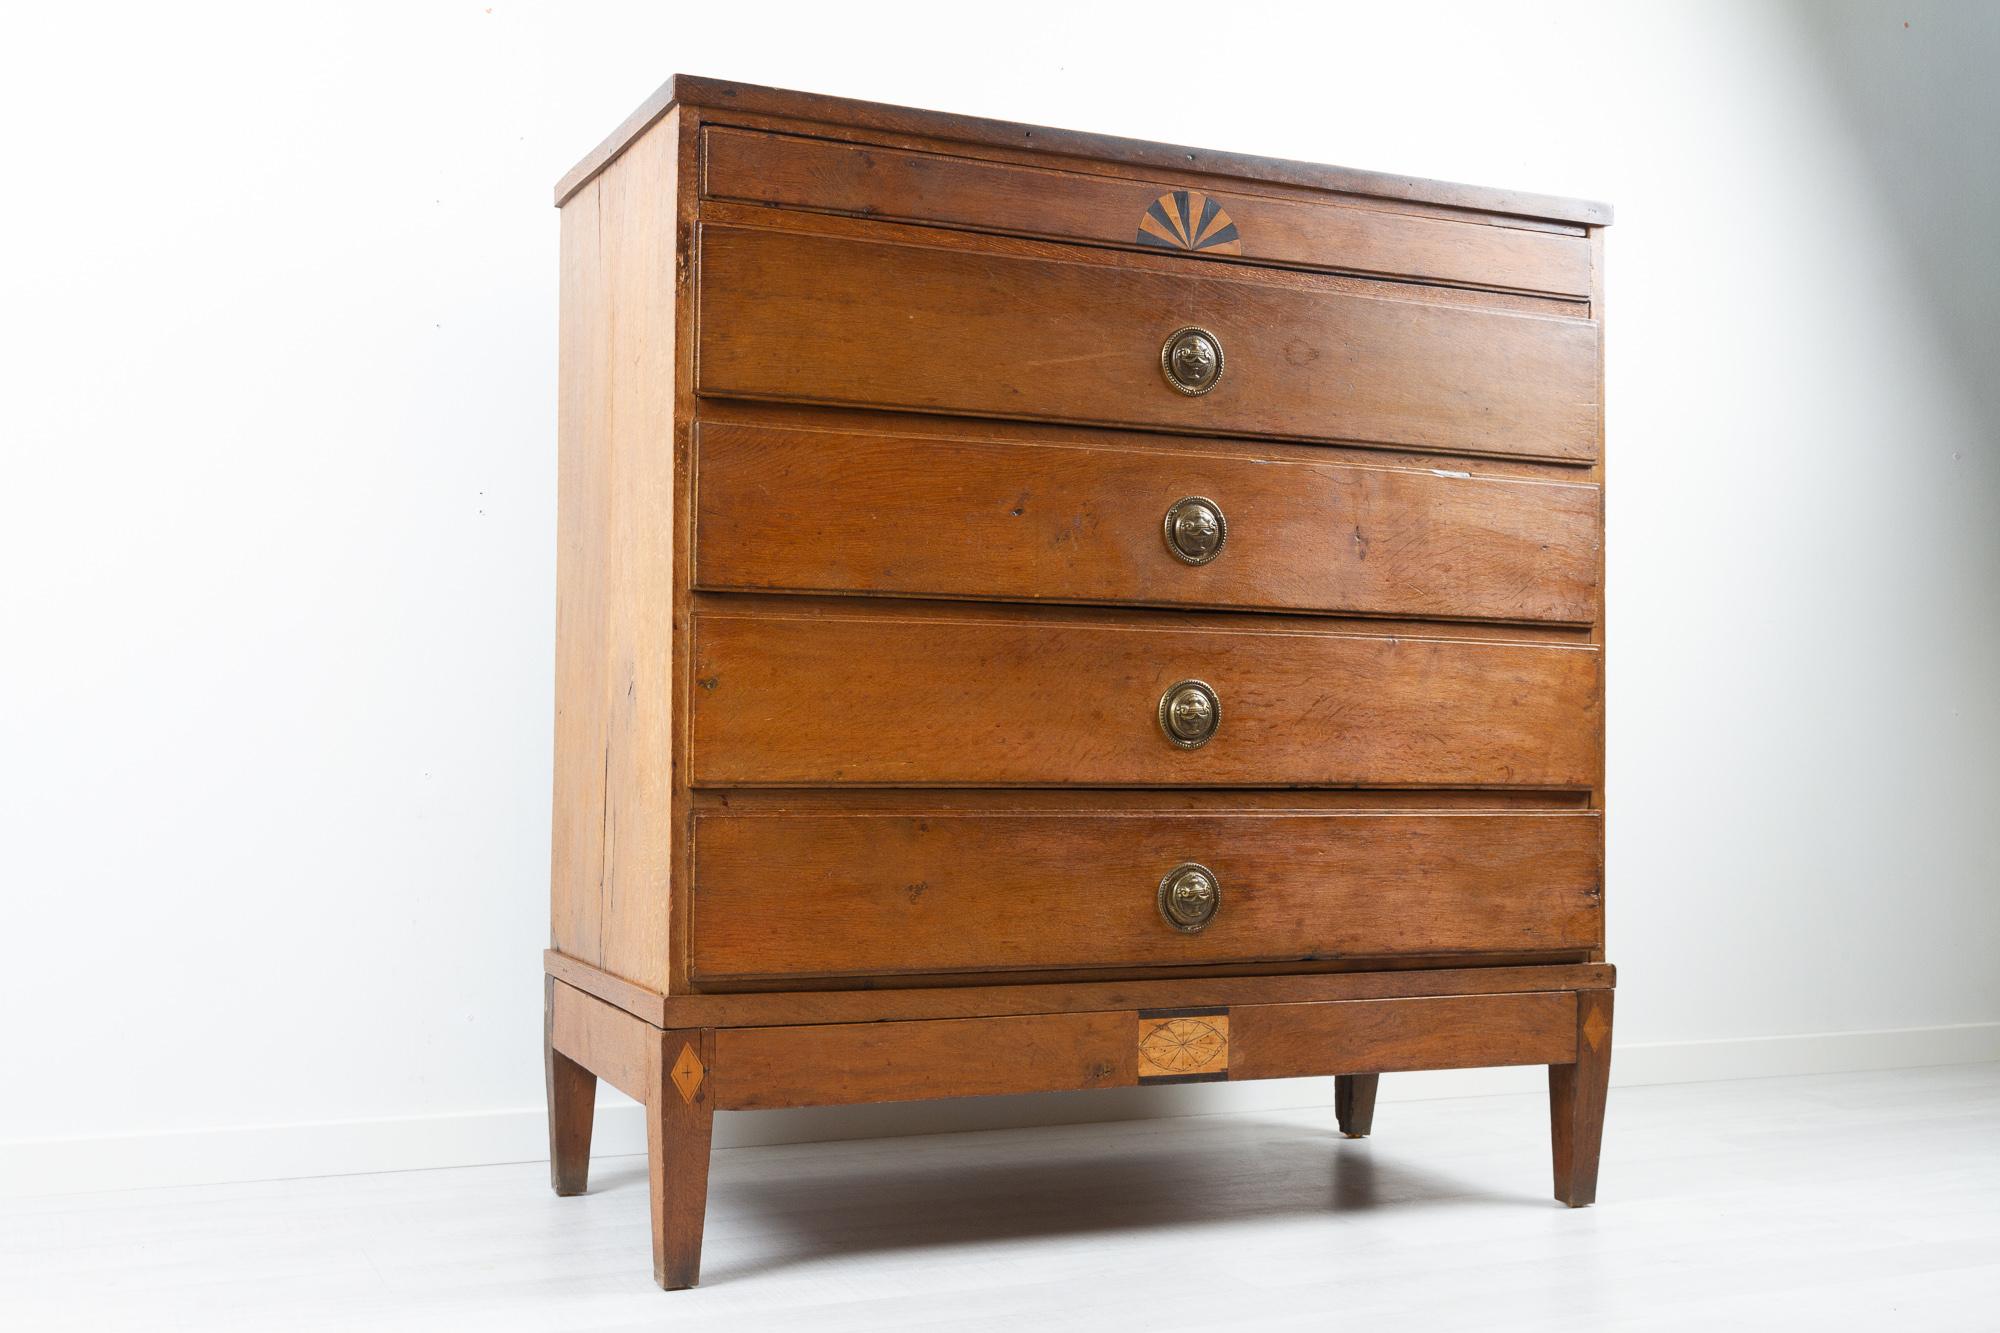 Antique Danish empire commode ca. 1810.
This amazing rustic oak dresser was made in Denmark between 1800 and 1810. The early influence of empire design is seen in the sun burst inlay and the urns on the original cast brass fittings. It features